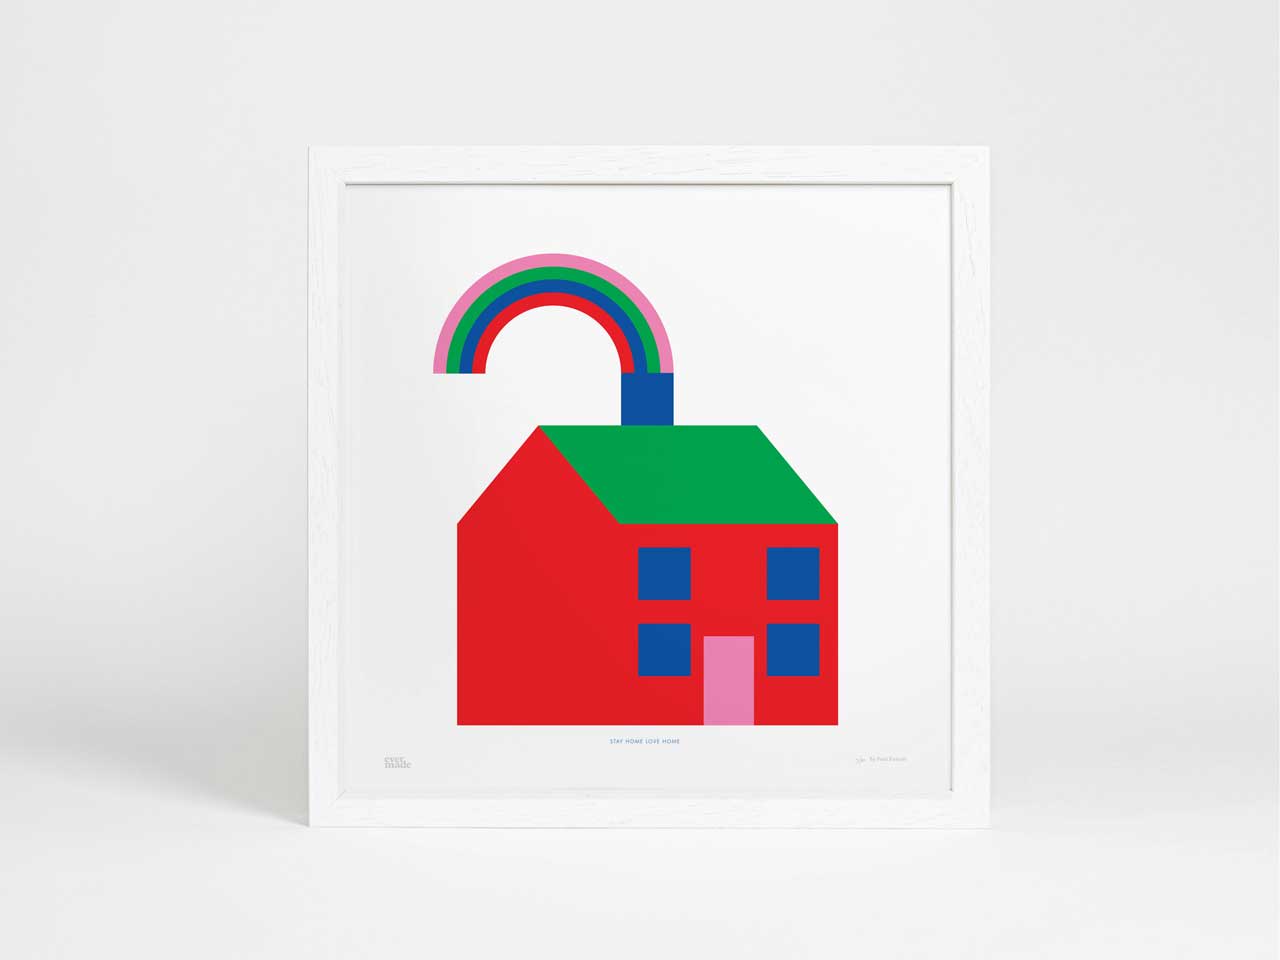 Evermade Rainbow Art Prints to Support Frontline Workers of the NHS - Design Milk